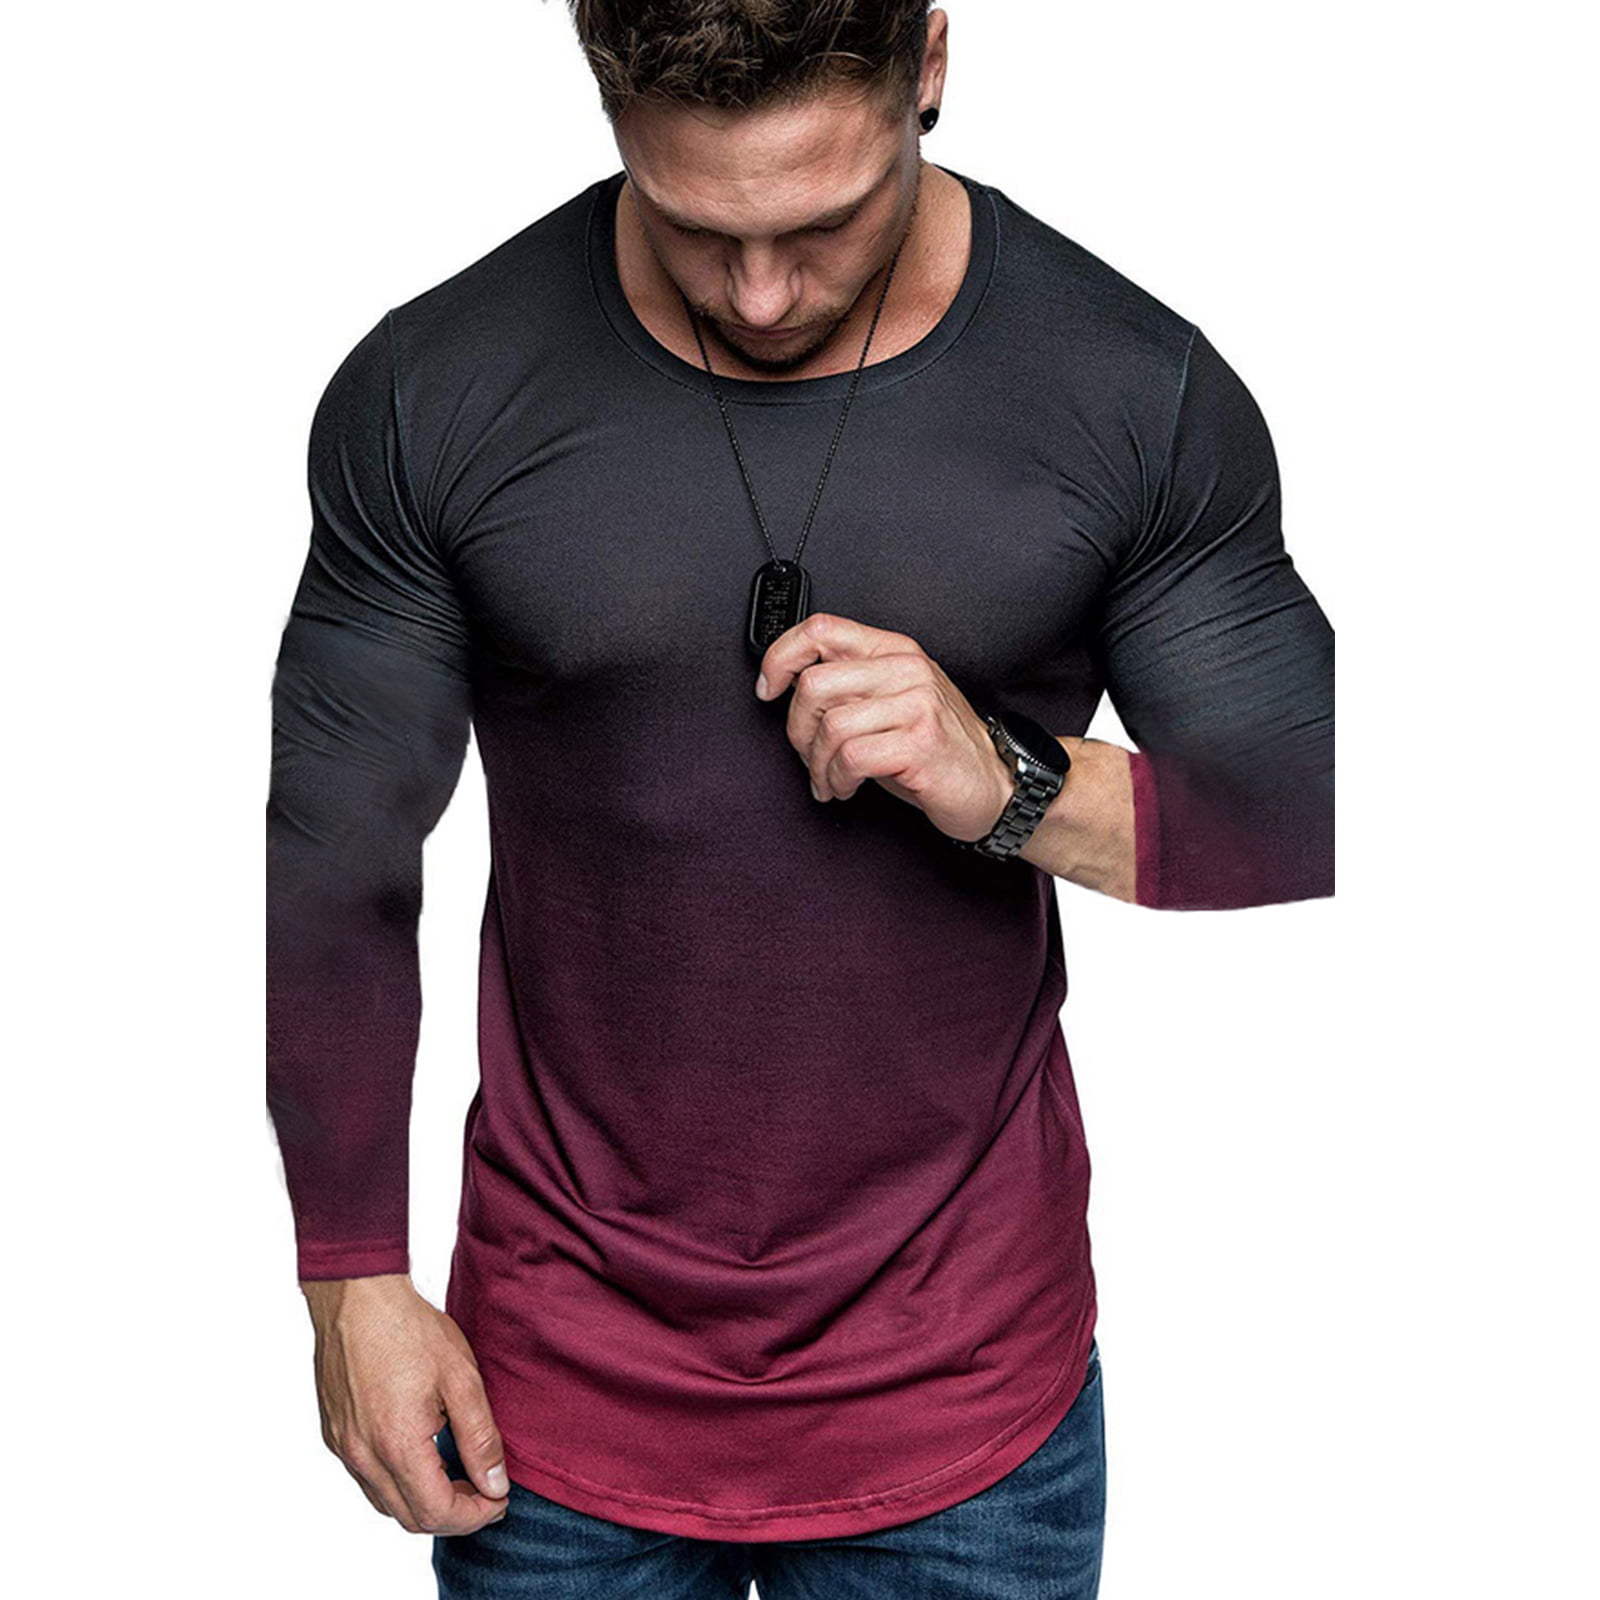 unbrand - Men Long Sleeve Slim Fit O-Neck Muscle Tee T-shirt Casual ...